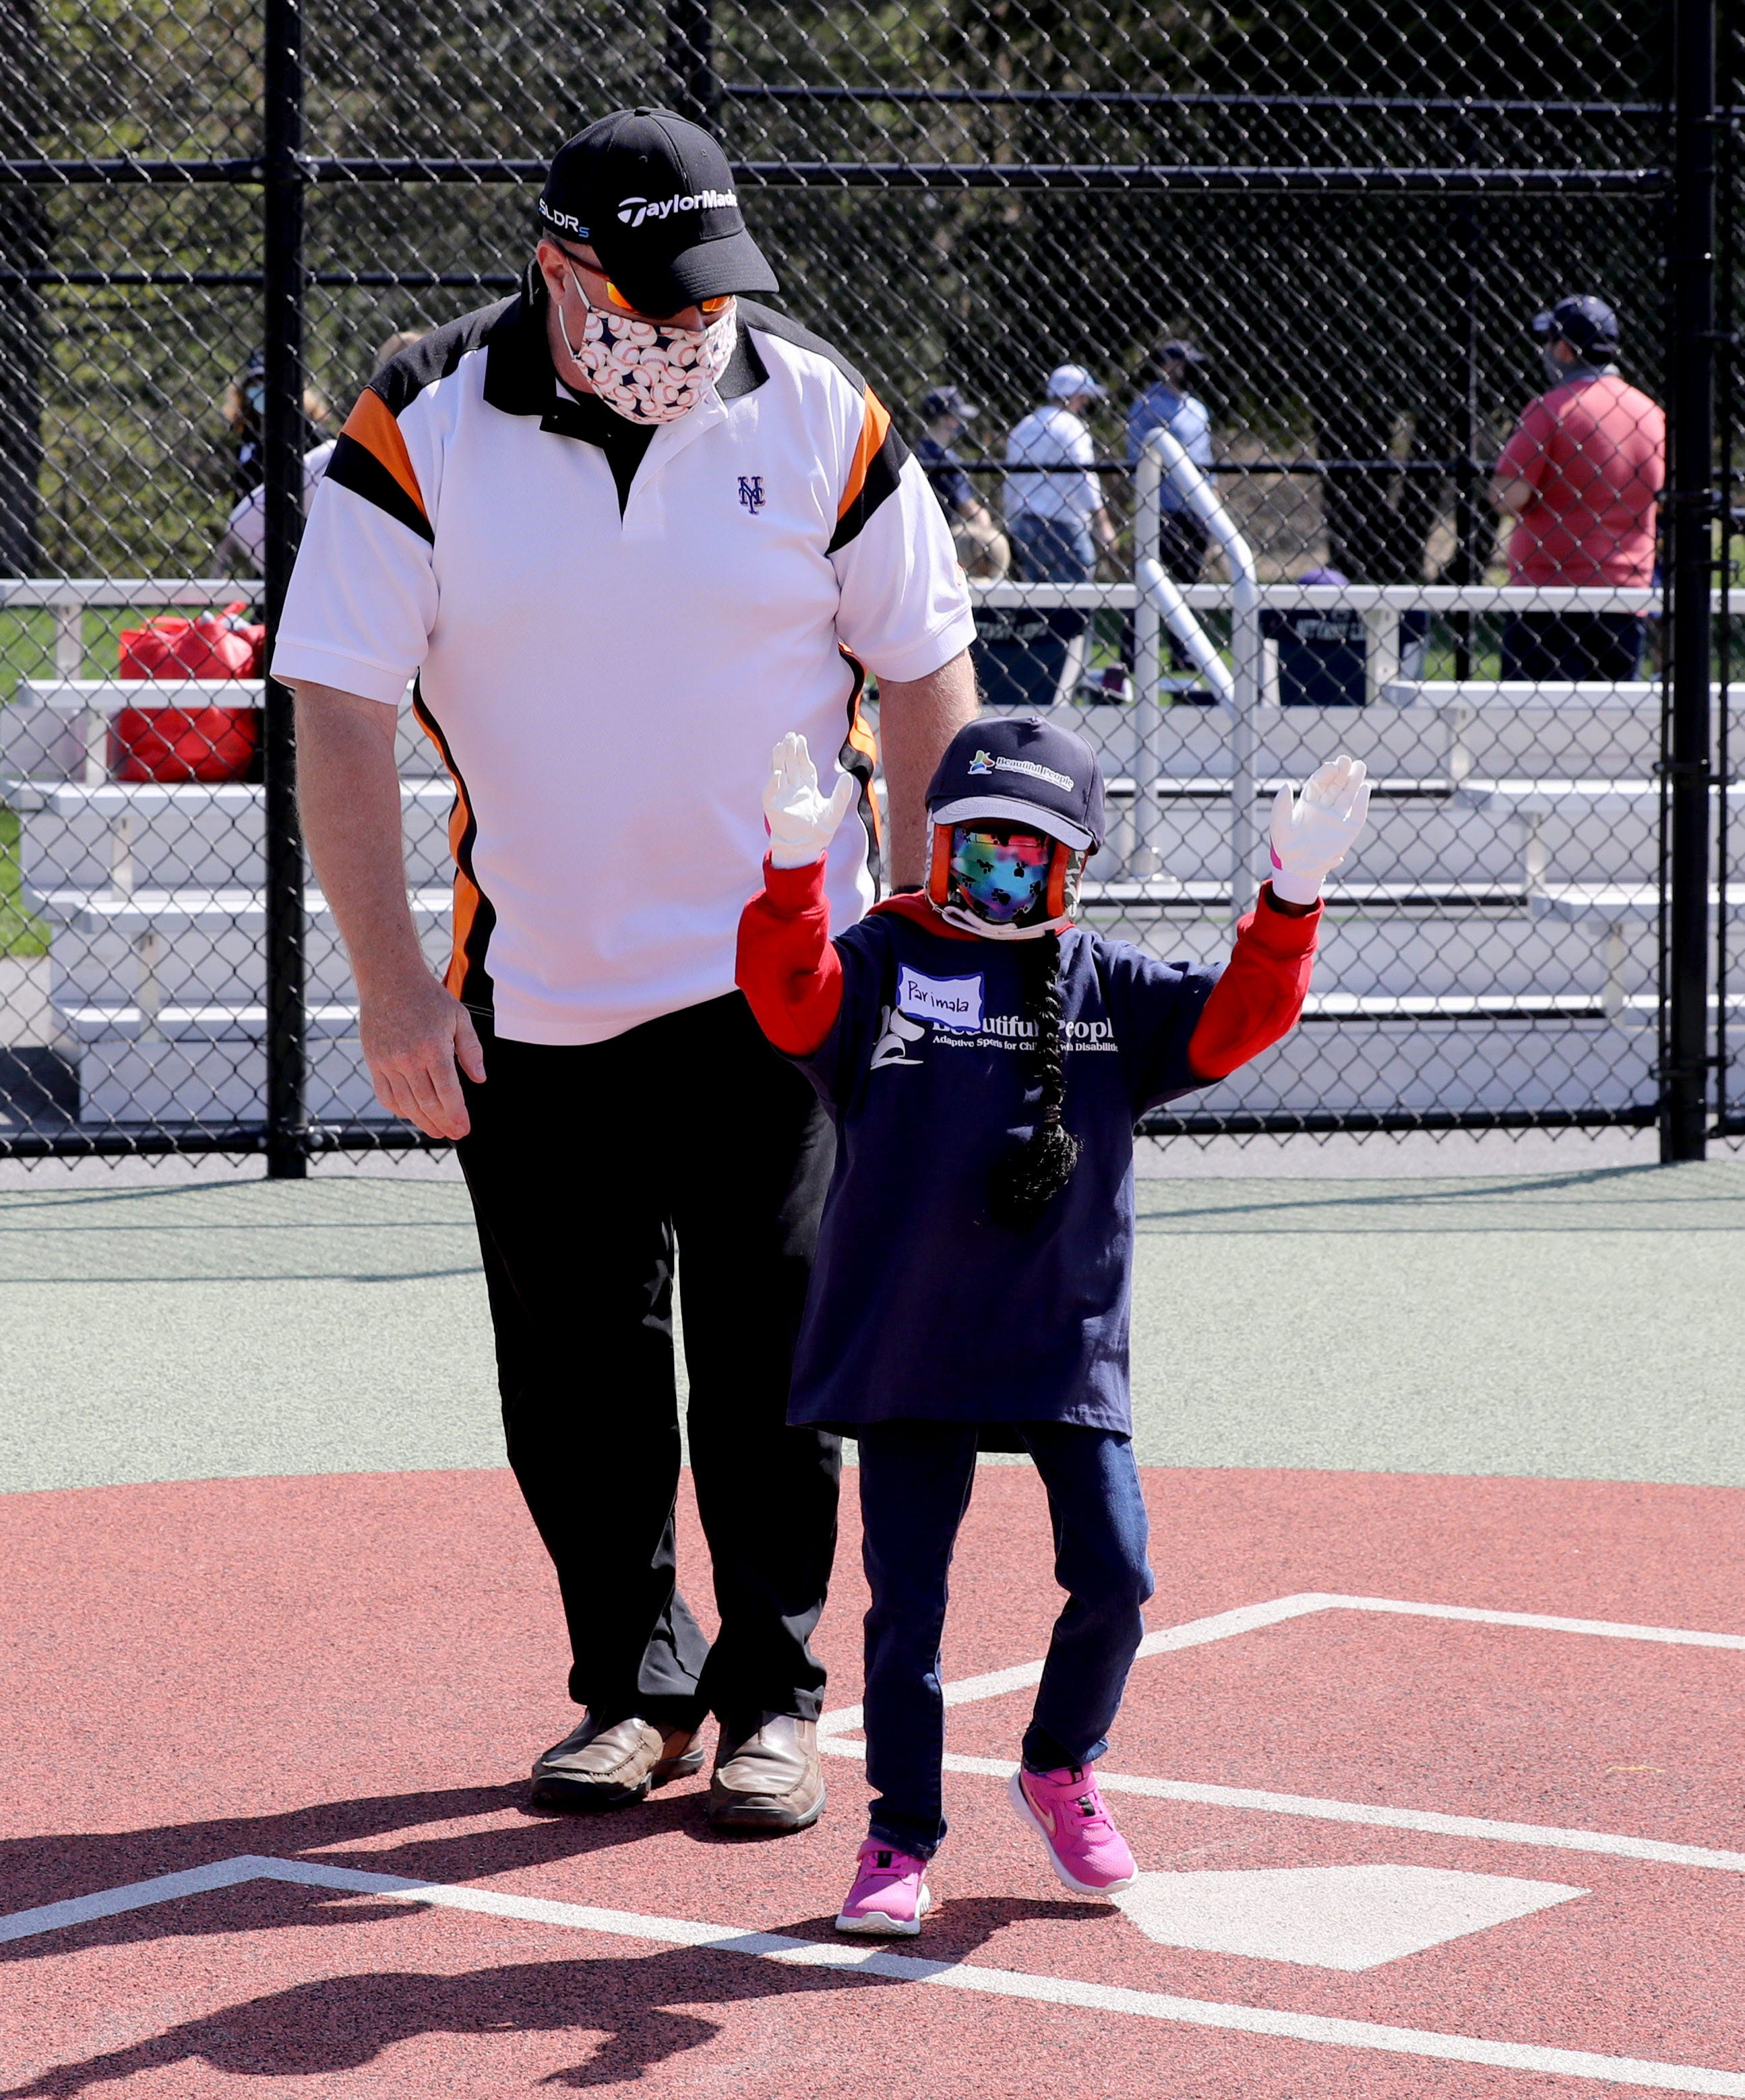 Parimala Cosgrove, 11, of Grahamsville, N.Y. celebrates after scoring a run she plays baseball during opening day for Beautiful People Baseball in Warwick, N.Y. May 2, 2021. The baseball program is one of the sports offered by Beautiful People, which provided adaptive sports for children with disabilities. 